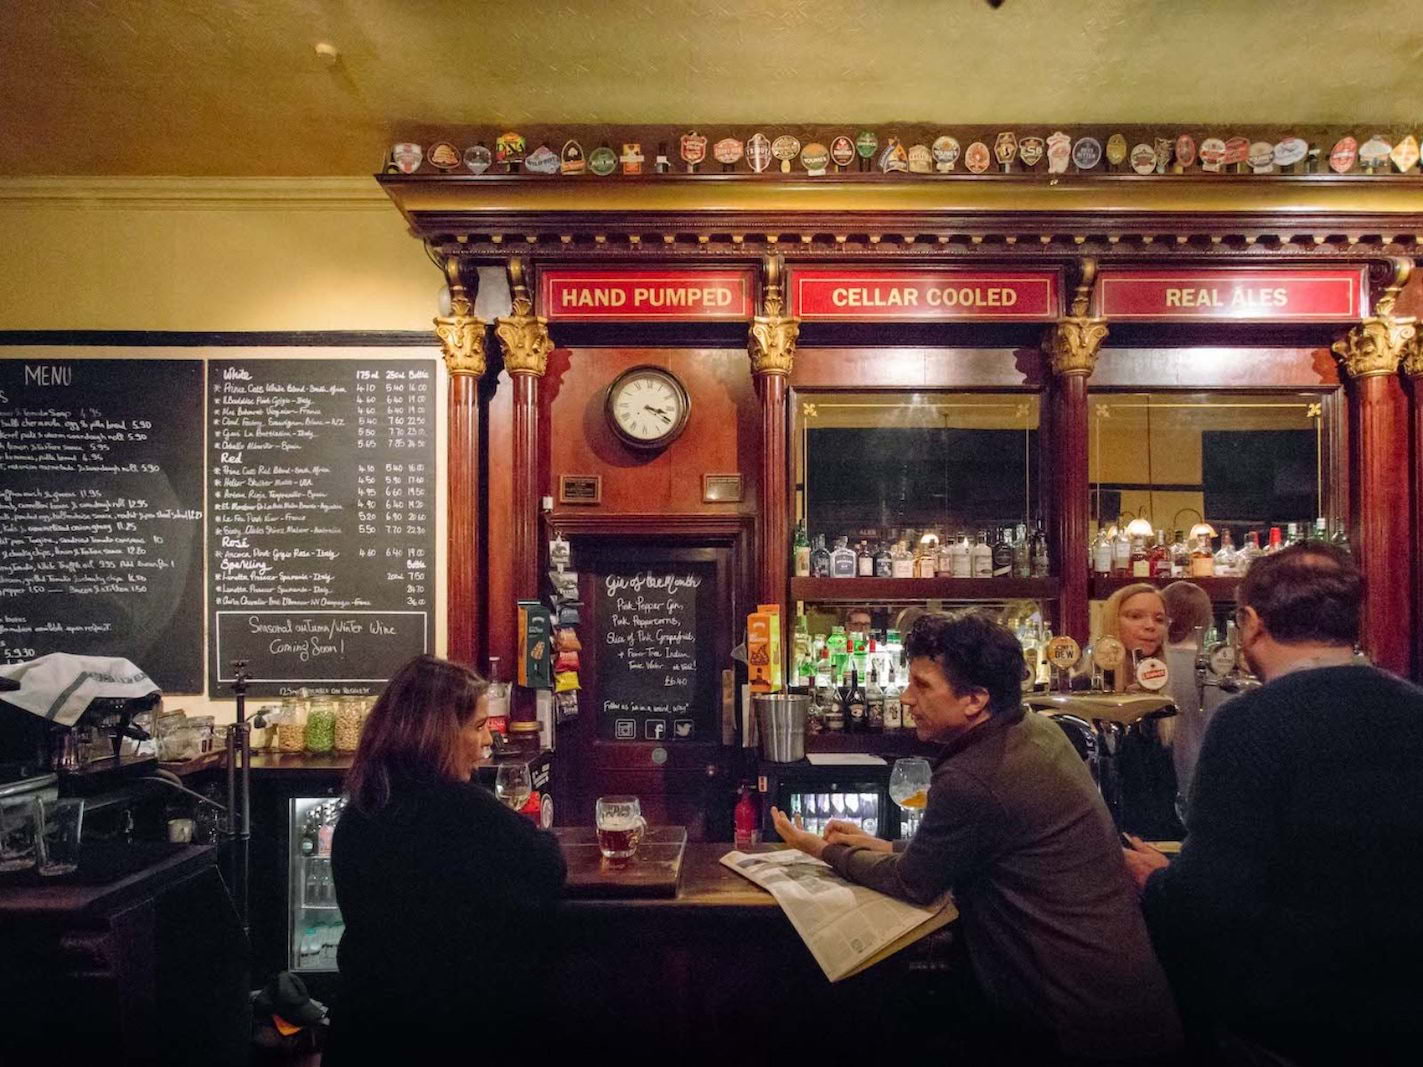 The Swimmer at the Grafton Arms – Pubs